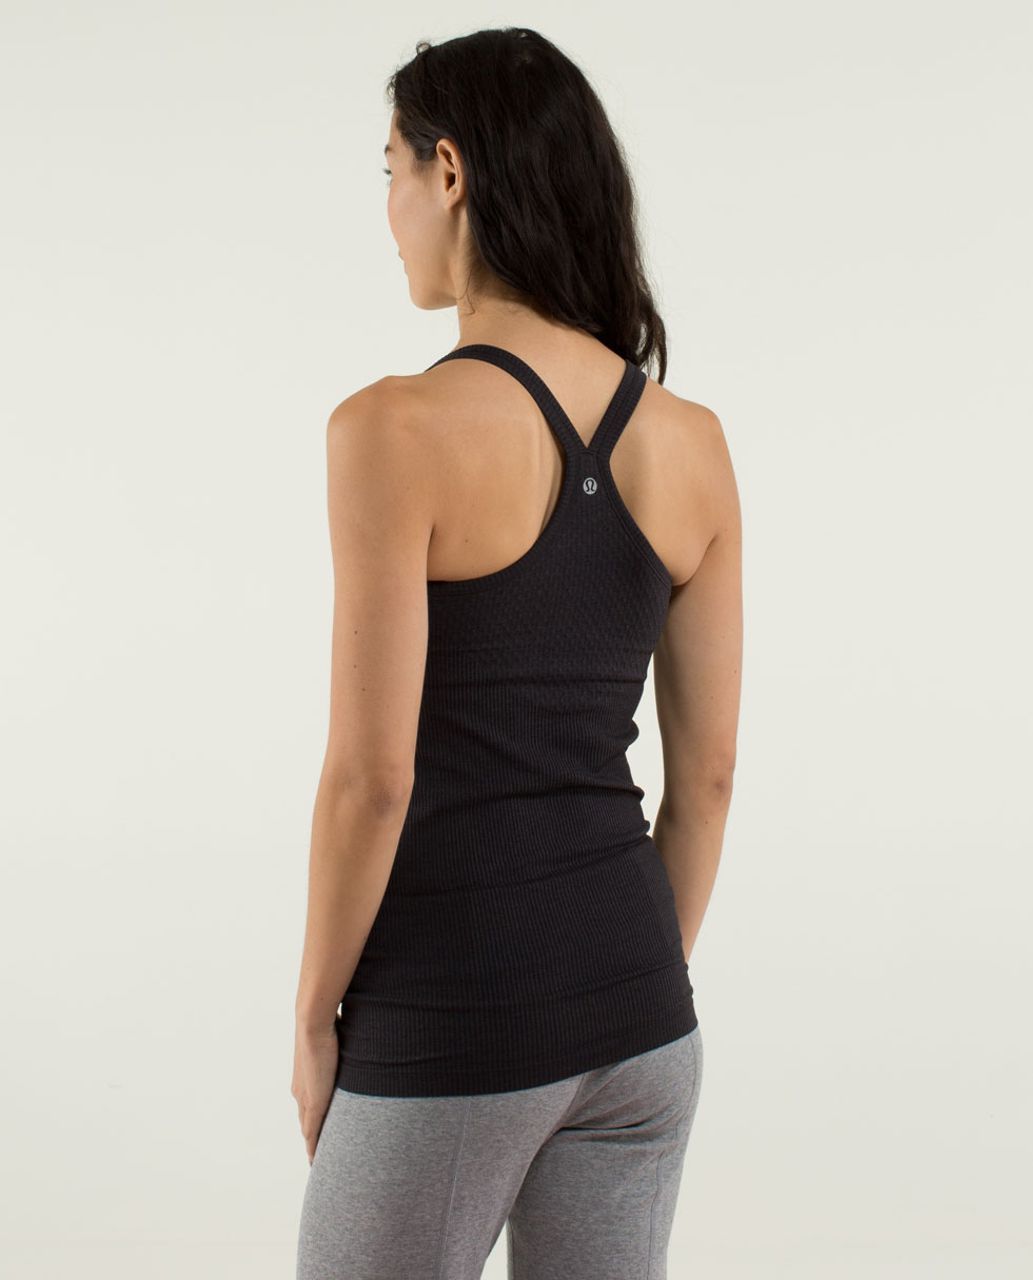 A little late this year with my Lulu-Anniversary post but thought I'd still  share. Purchased my first Lululemon items on International Women's Day  2020. Black Lululemon Align Tank and 25” Aligns. It's